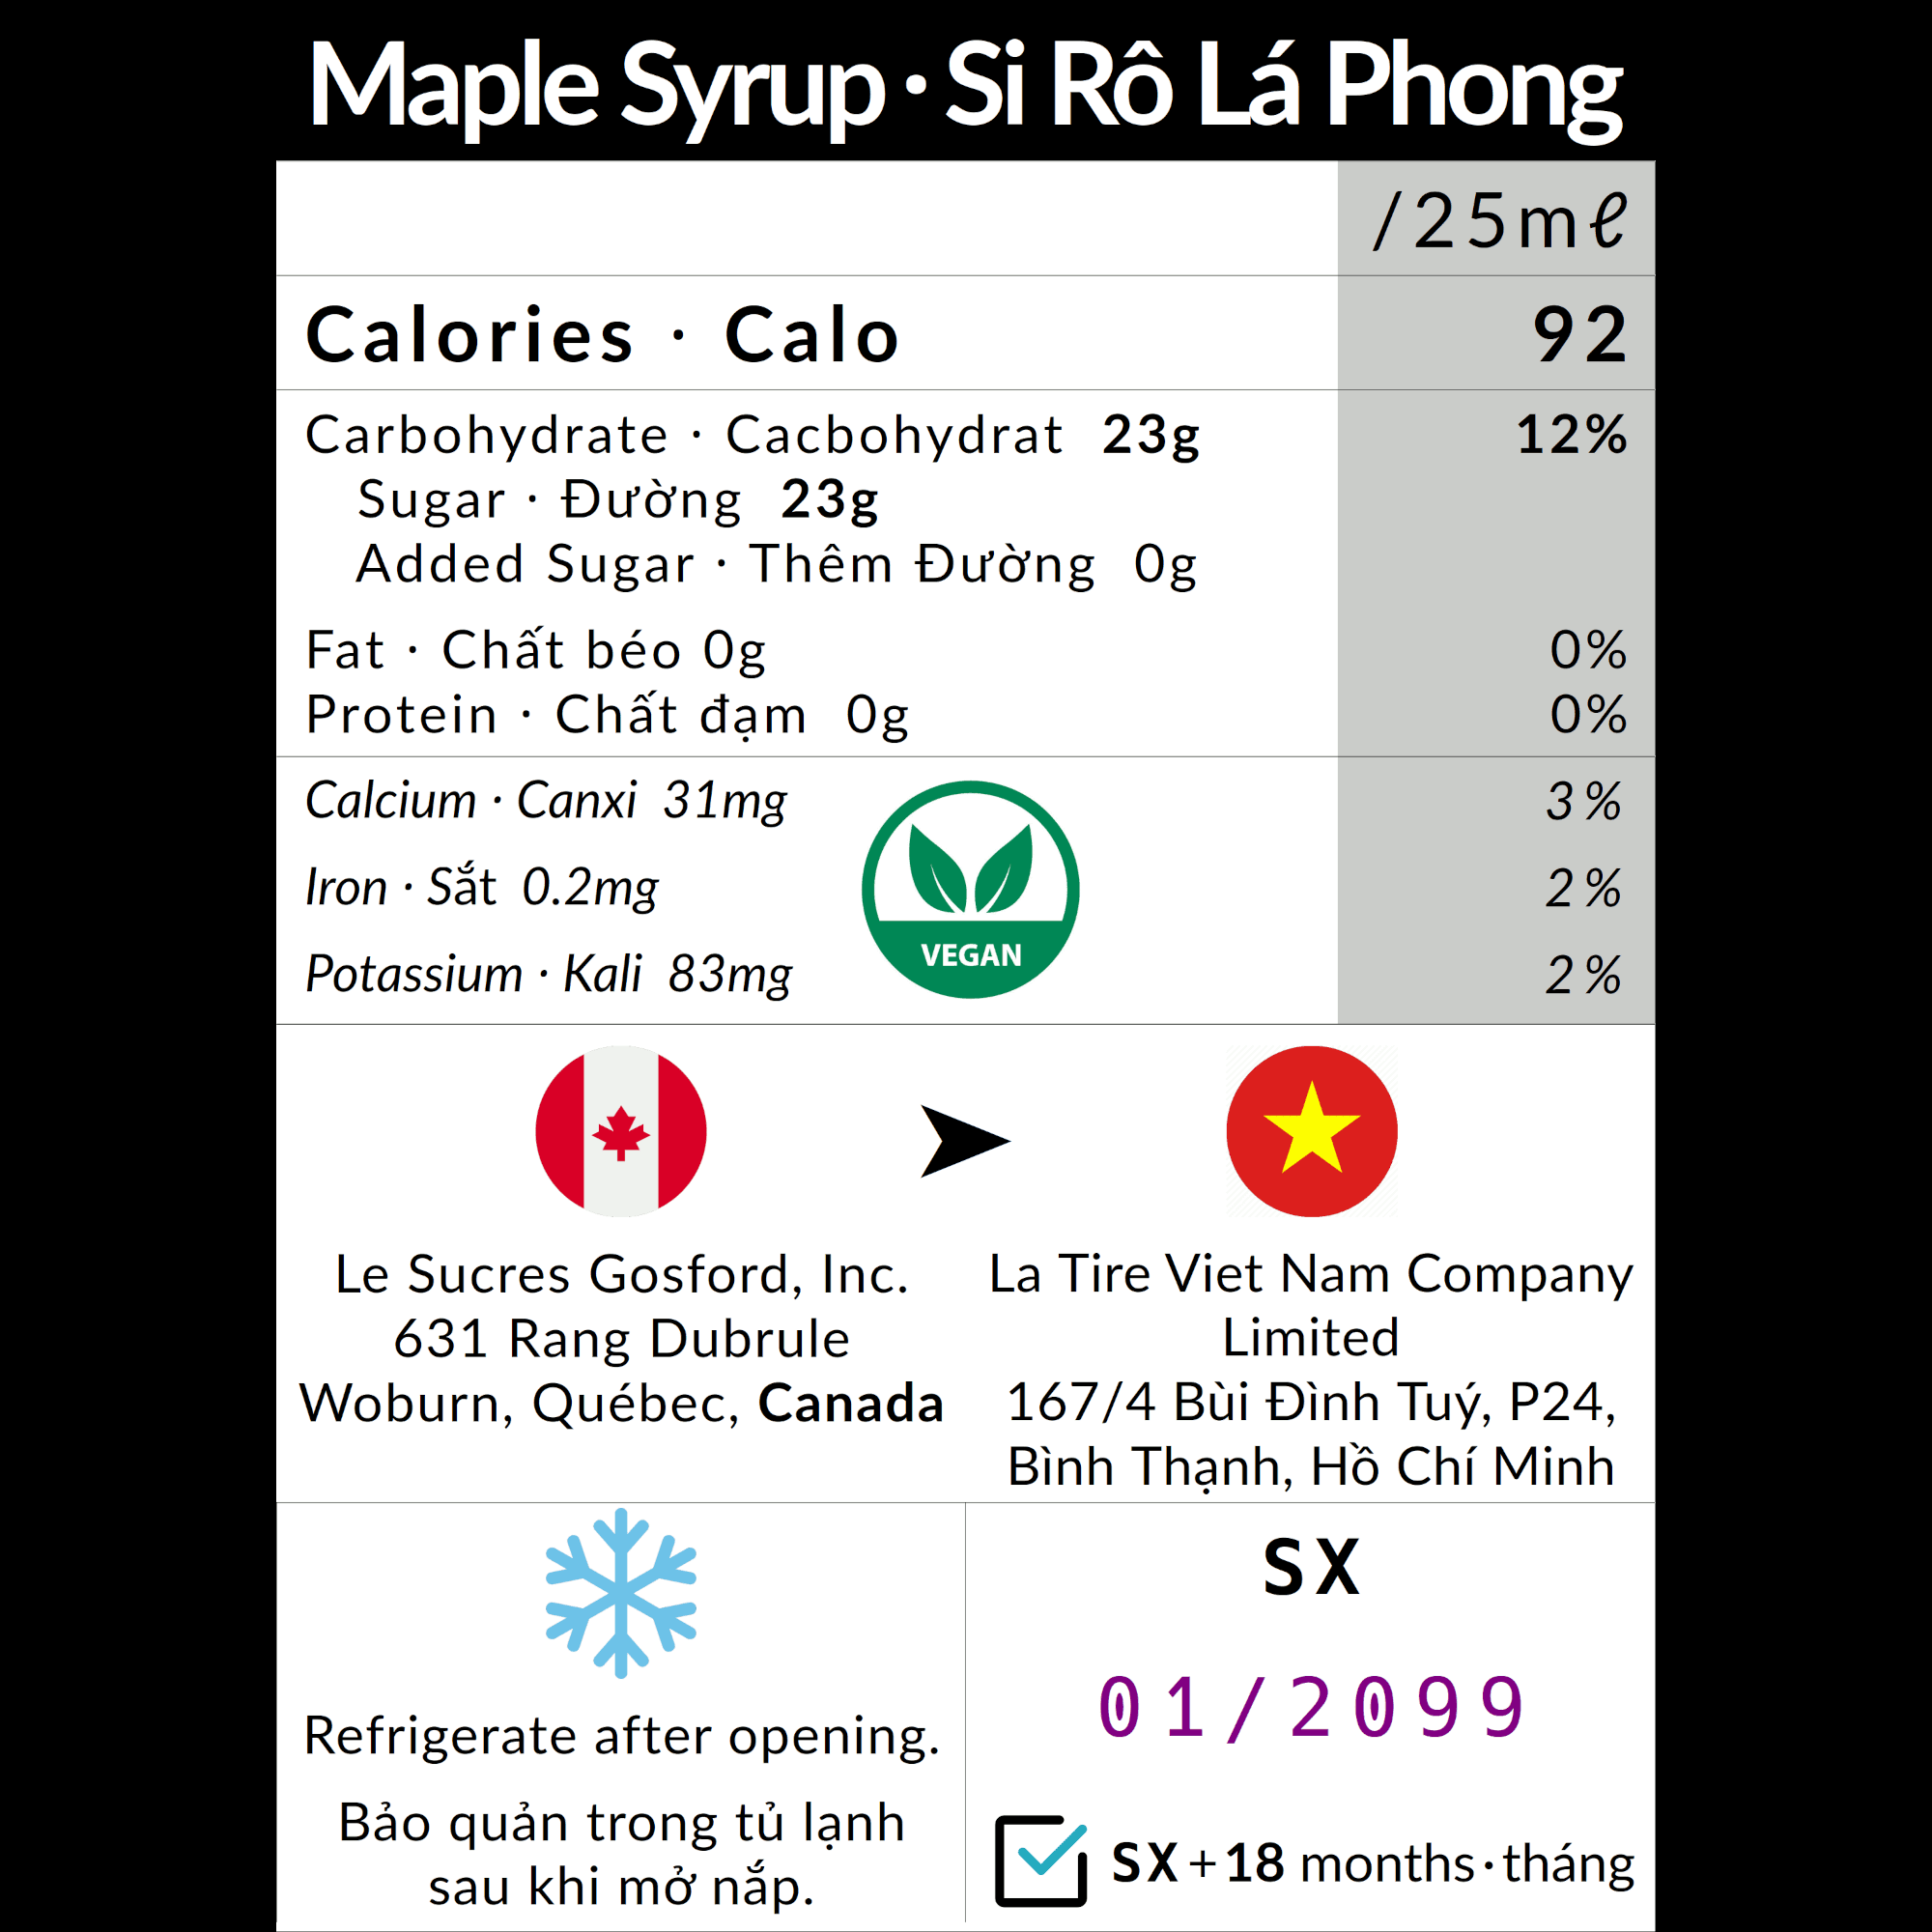  Golden Maple Syrup 300mℓ 